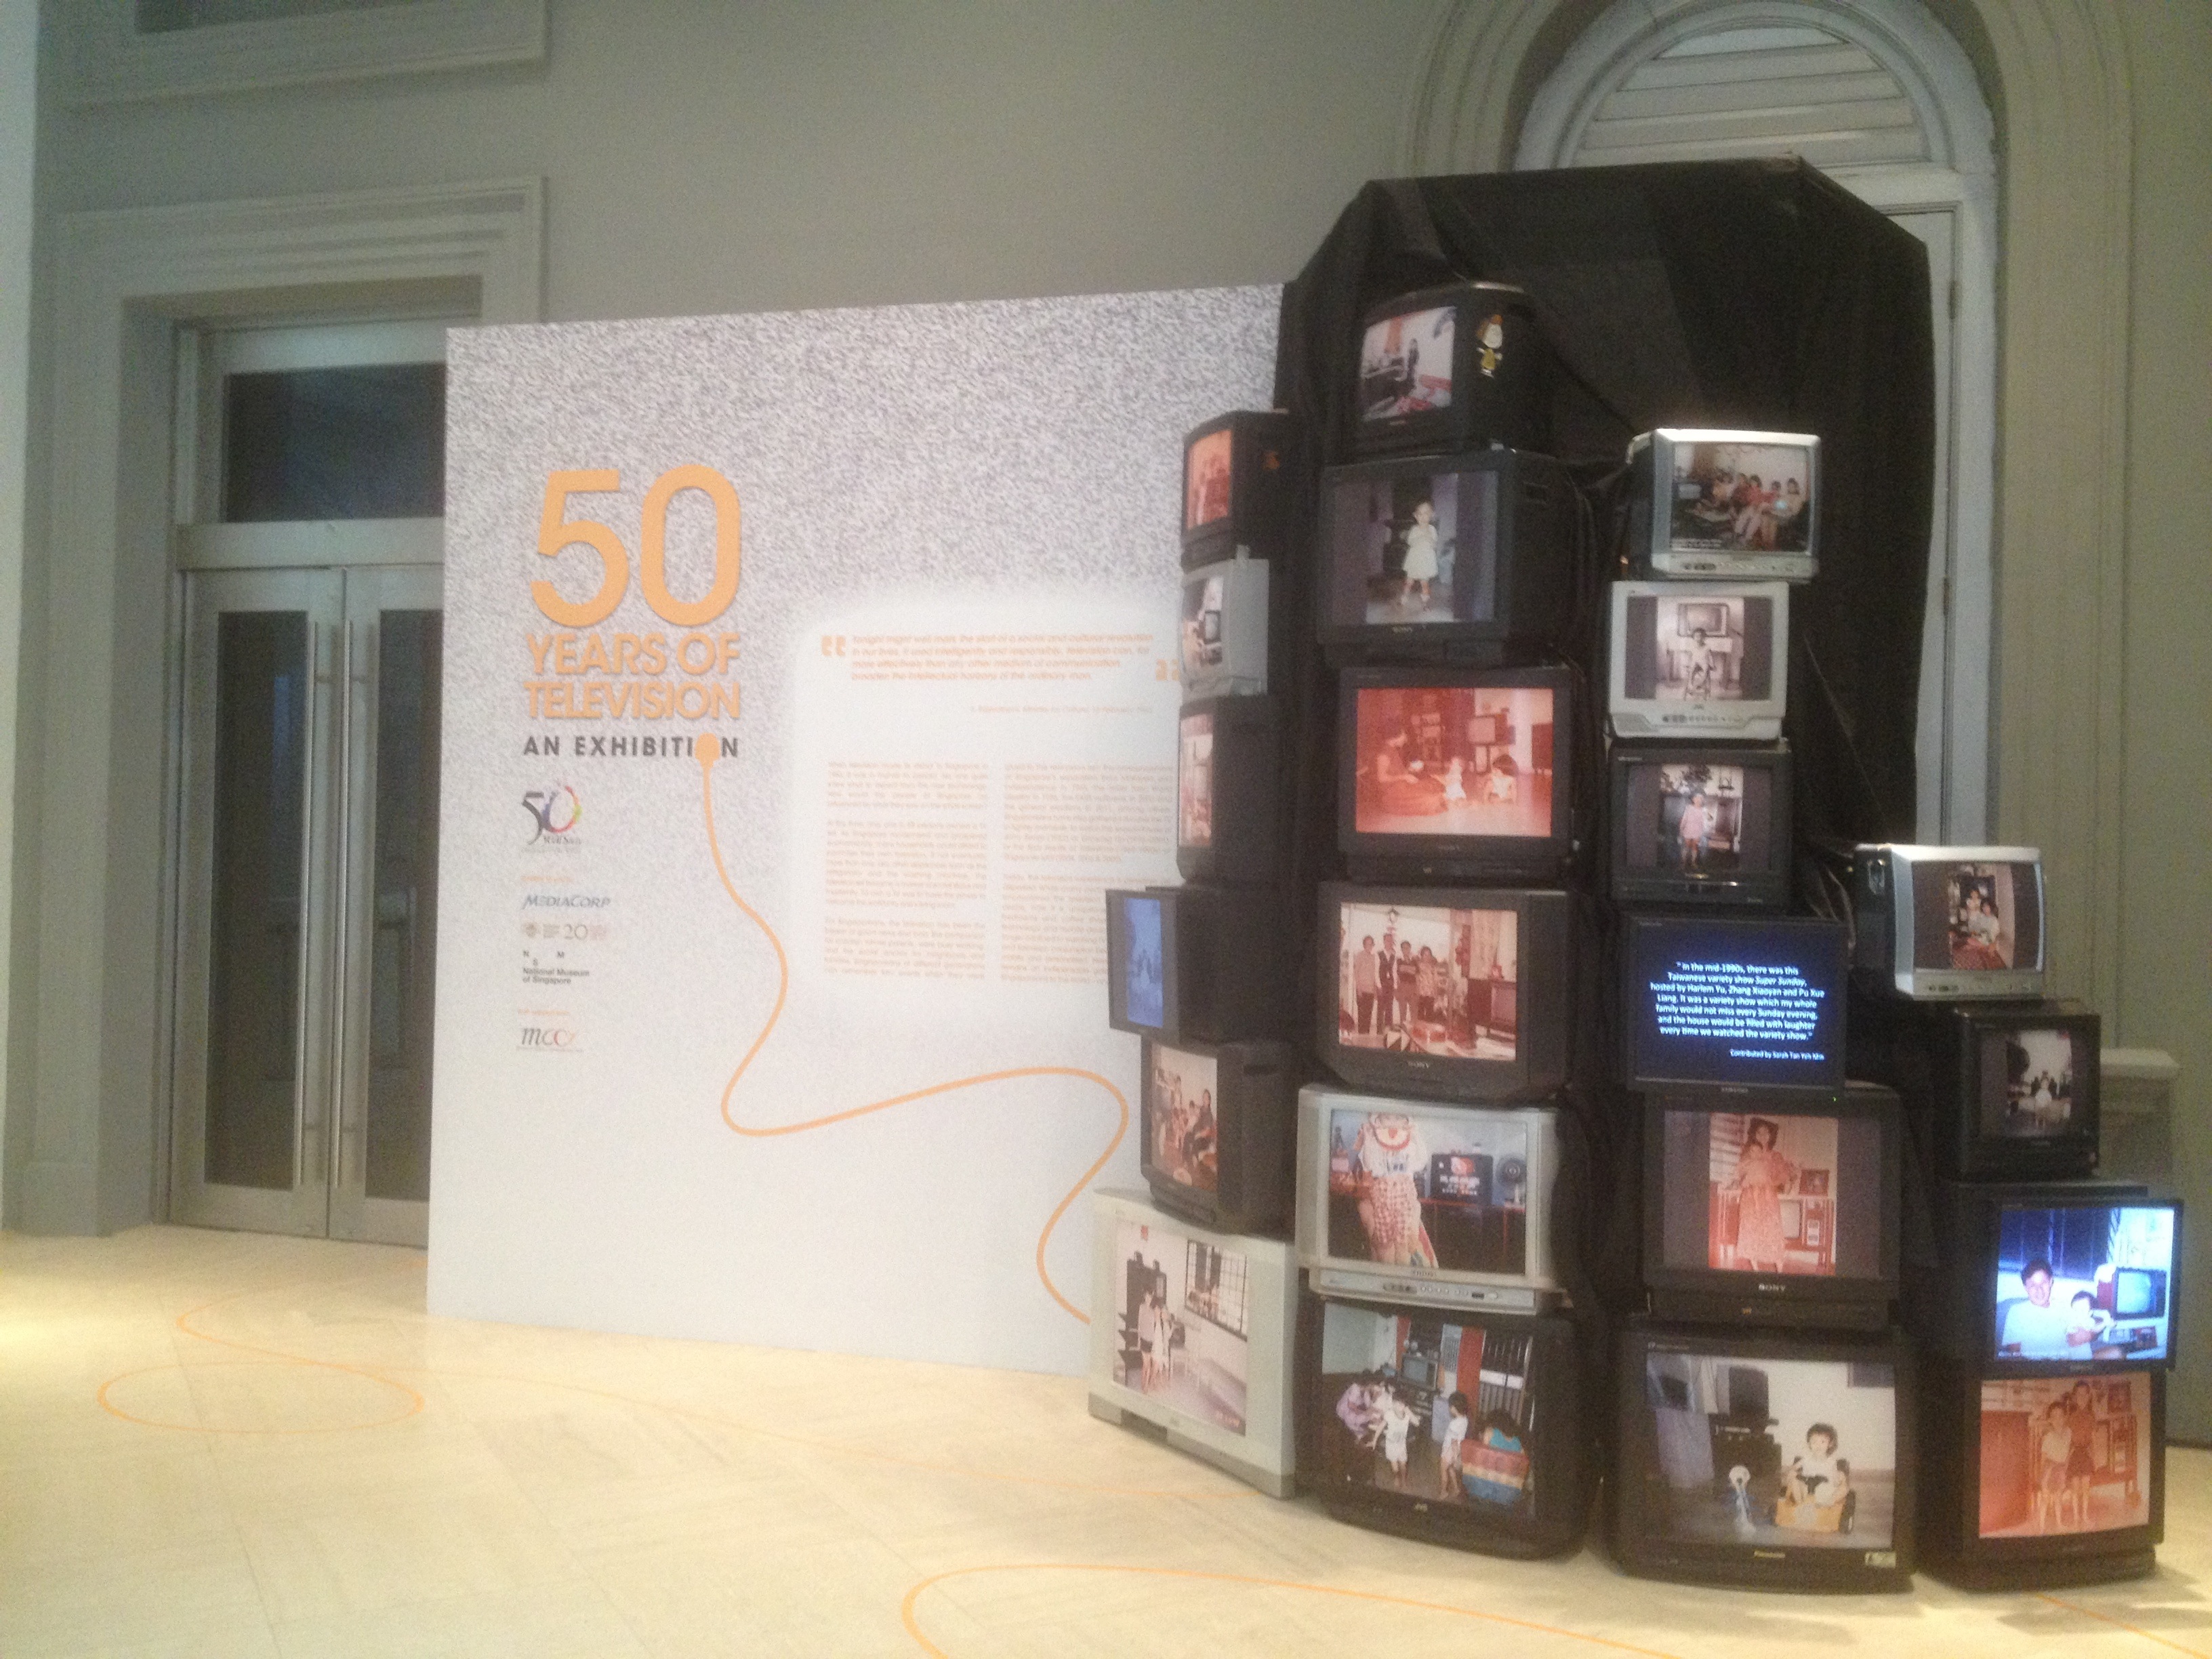 Opening tomorrow: "50 Years of Television: An Exhibition"